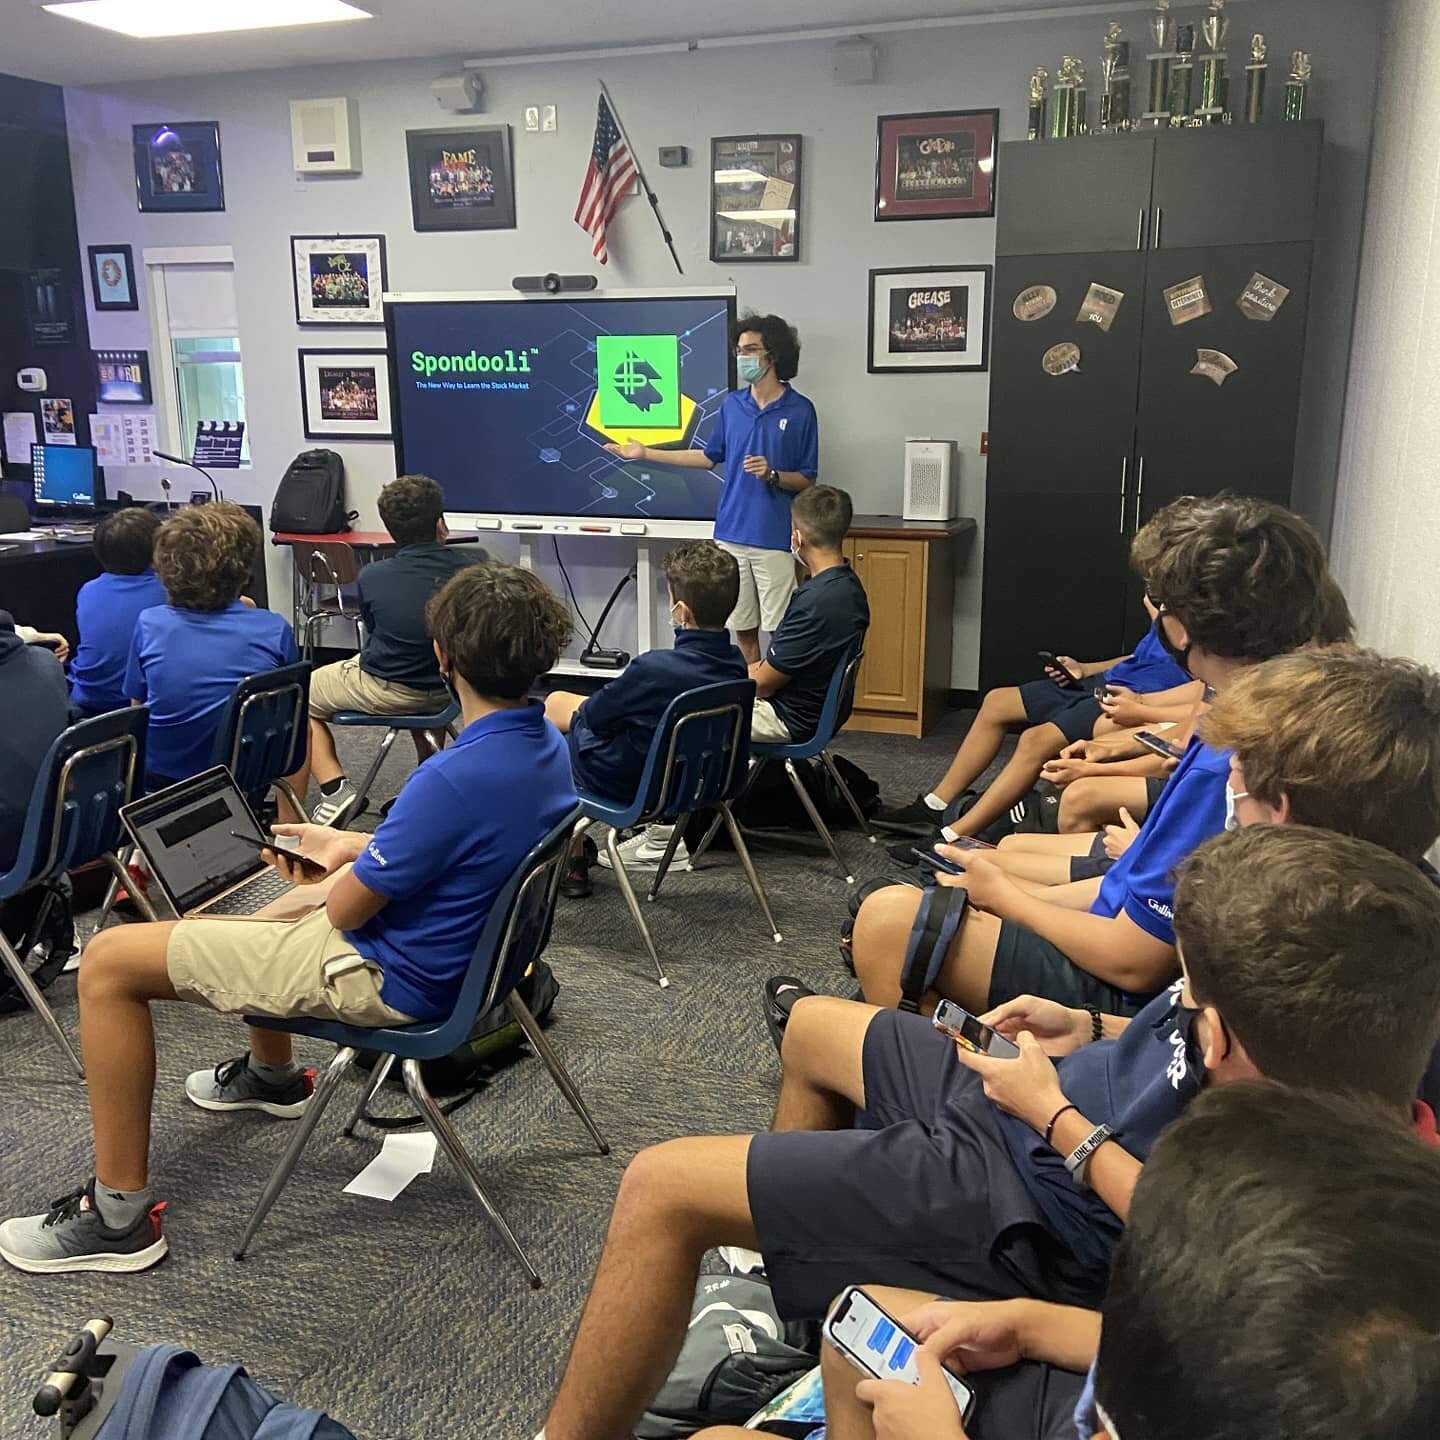 Spondooli's showcase as the Gulliver middle school Investment Club! 

We got a chance to help teach 7th and 8th graders at Gulliver about valuable financial literacy skills and the stock market.

Thank you to the Investment Club for inviting us!